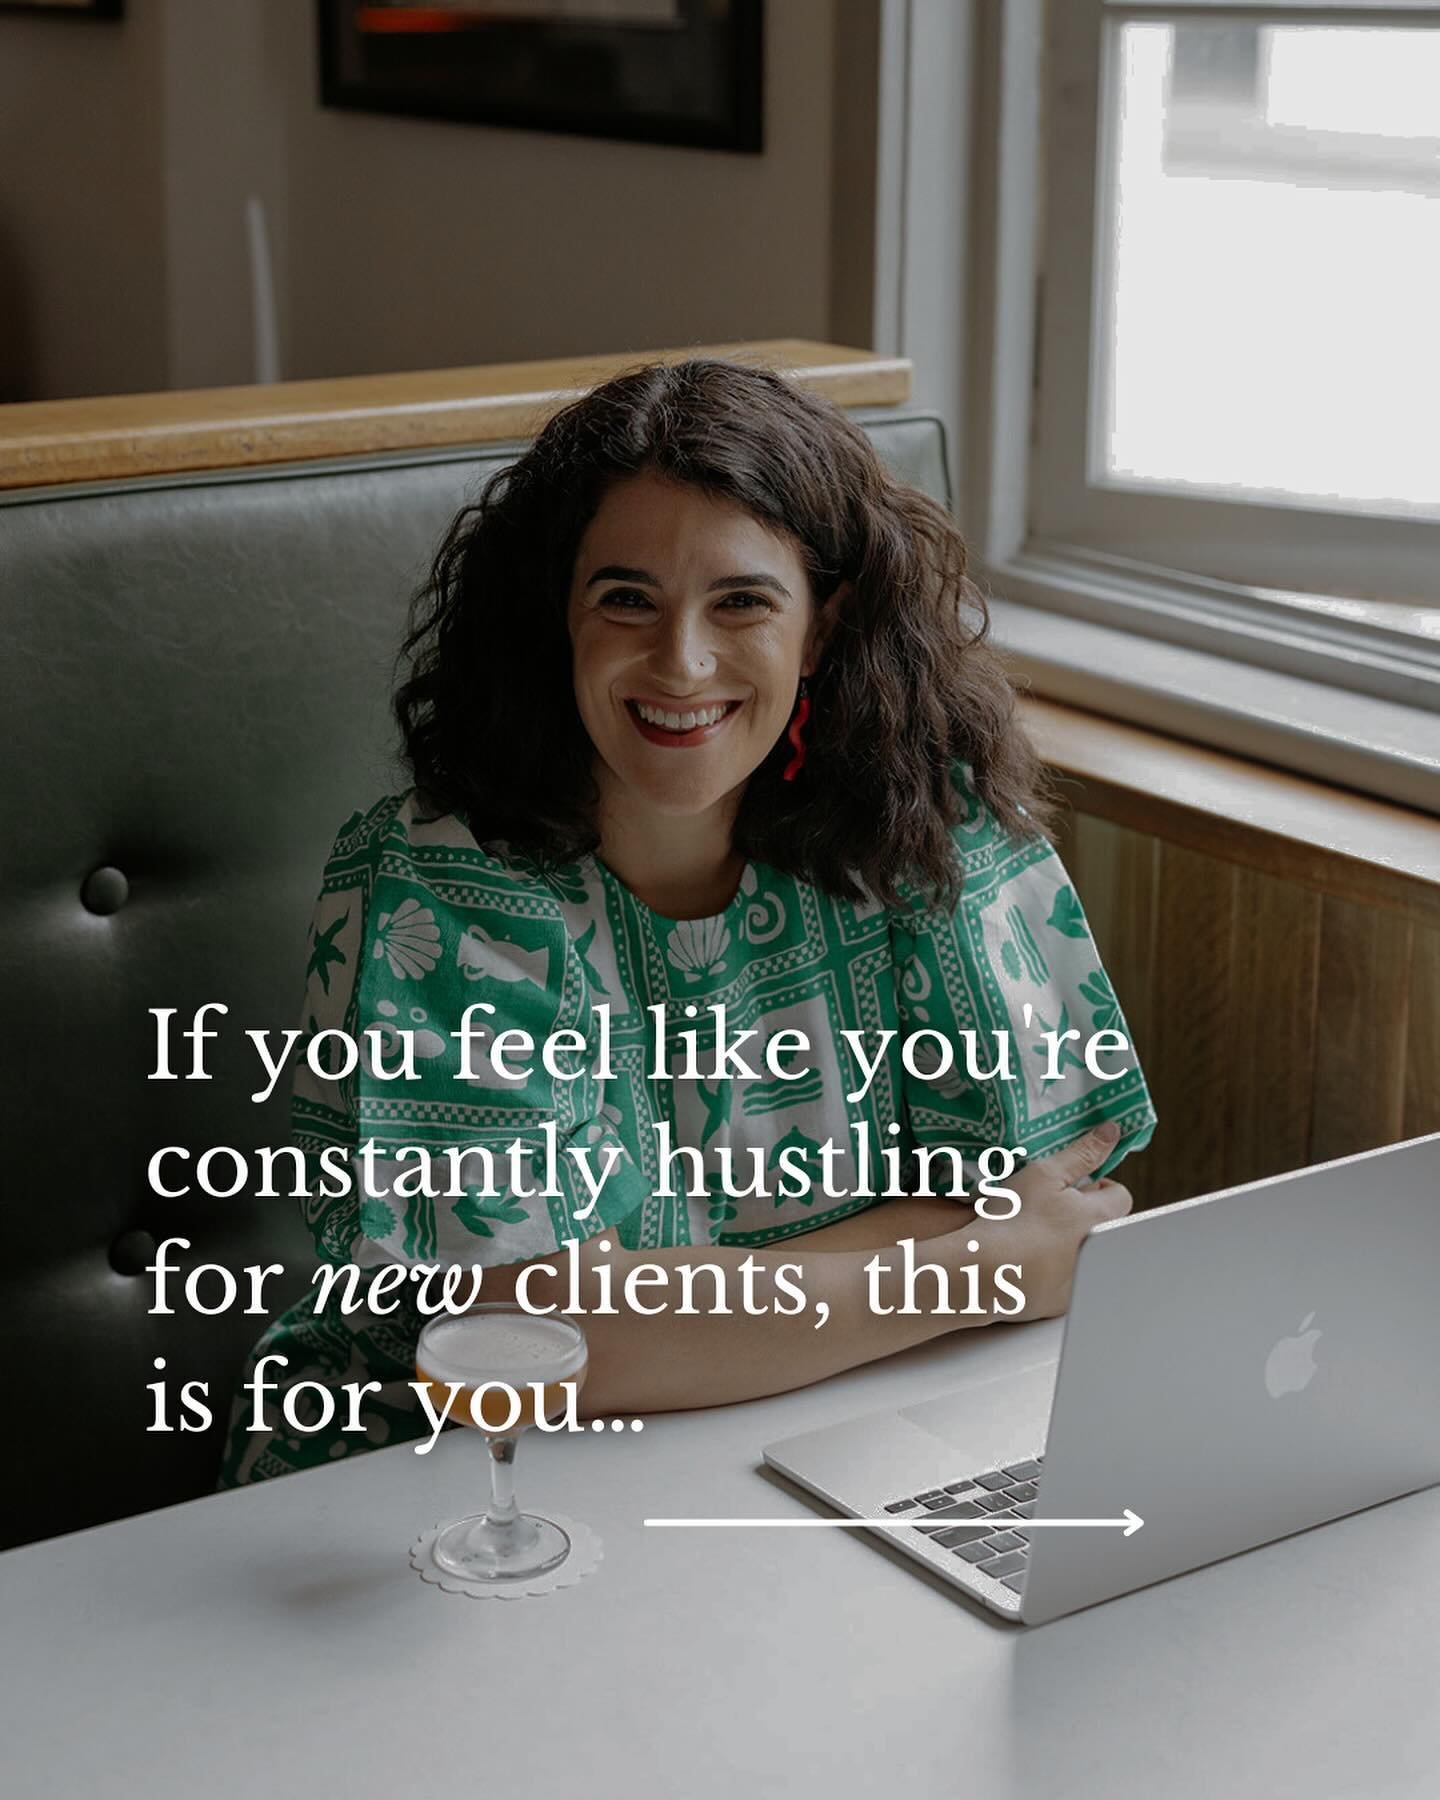 You know what&rsquo;s easier than constantly hustling for NEW clients? 

Keeping the ones you&rsquo;ve already got. 🙈

Client retention is easily one of the most simple but overlooked ways to get off the income rollercoaster and start thriving in bu